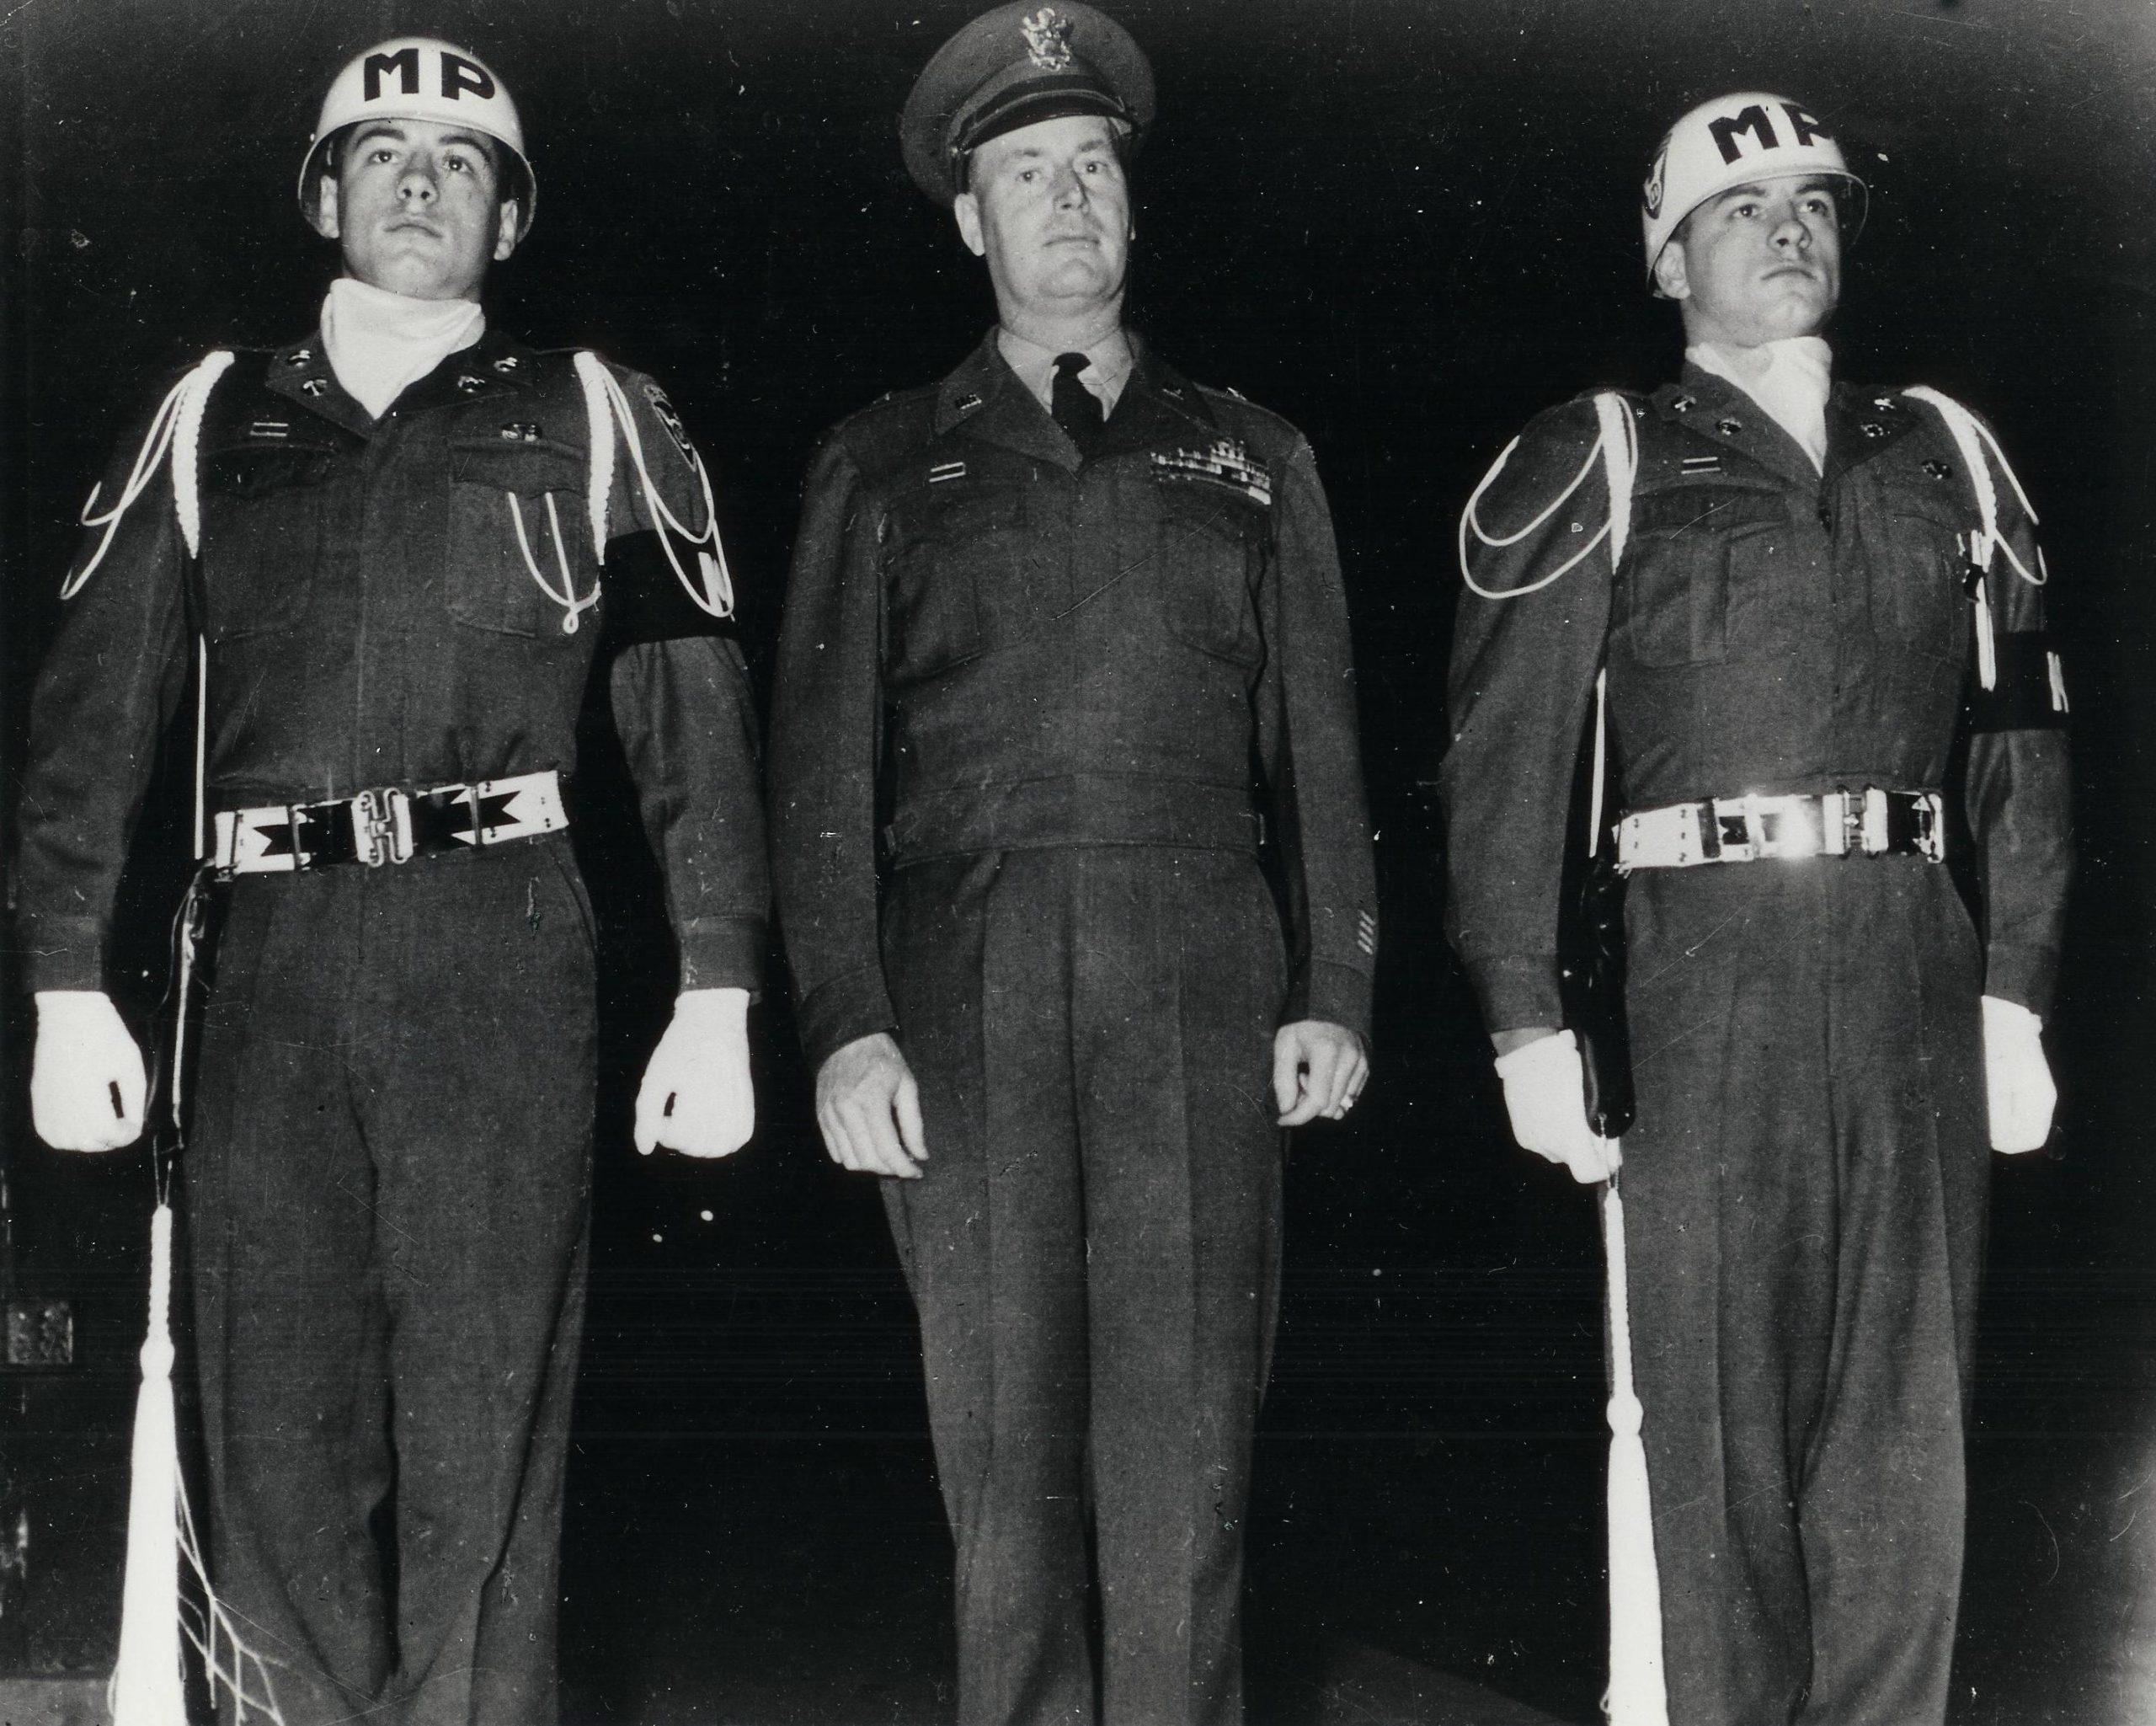 A picture of Robert and Richard, both age 17, with the 11th Airborne Division commander in Sendai Japan 1947.